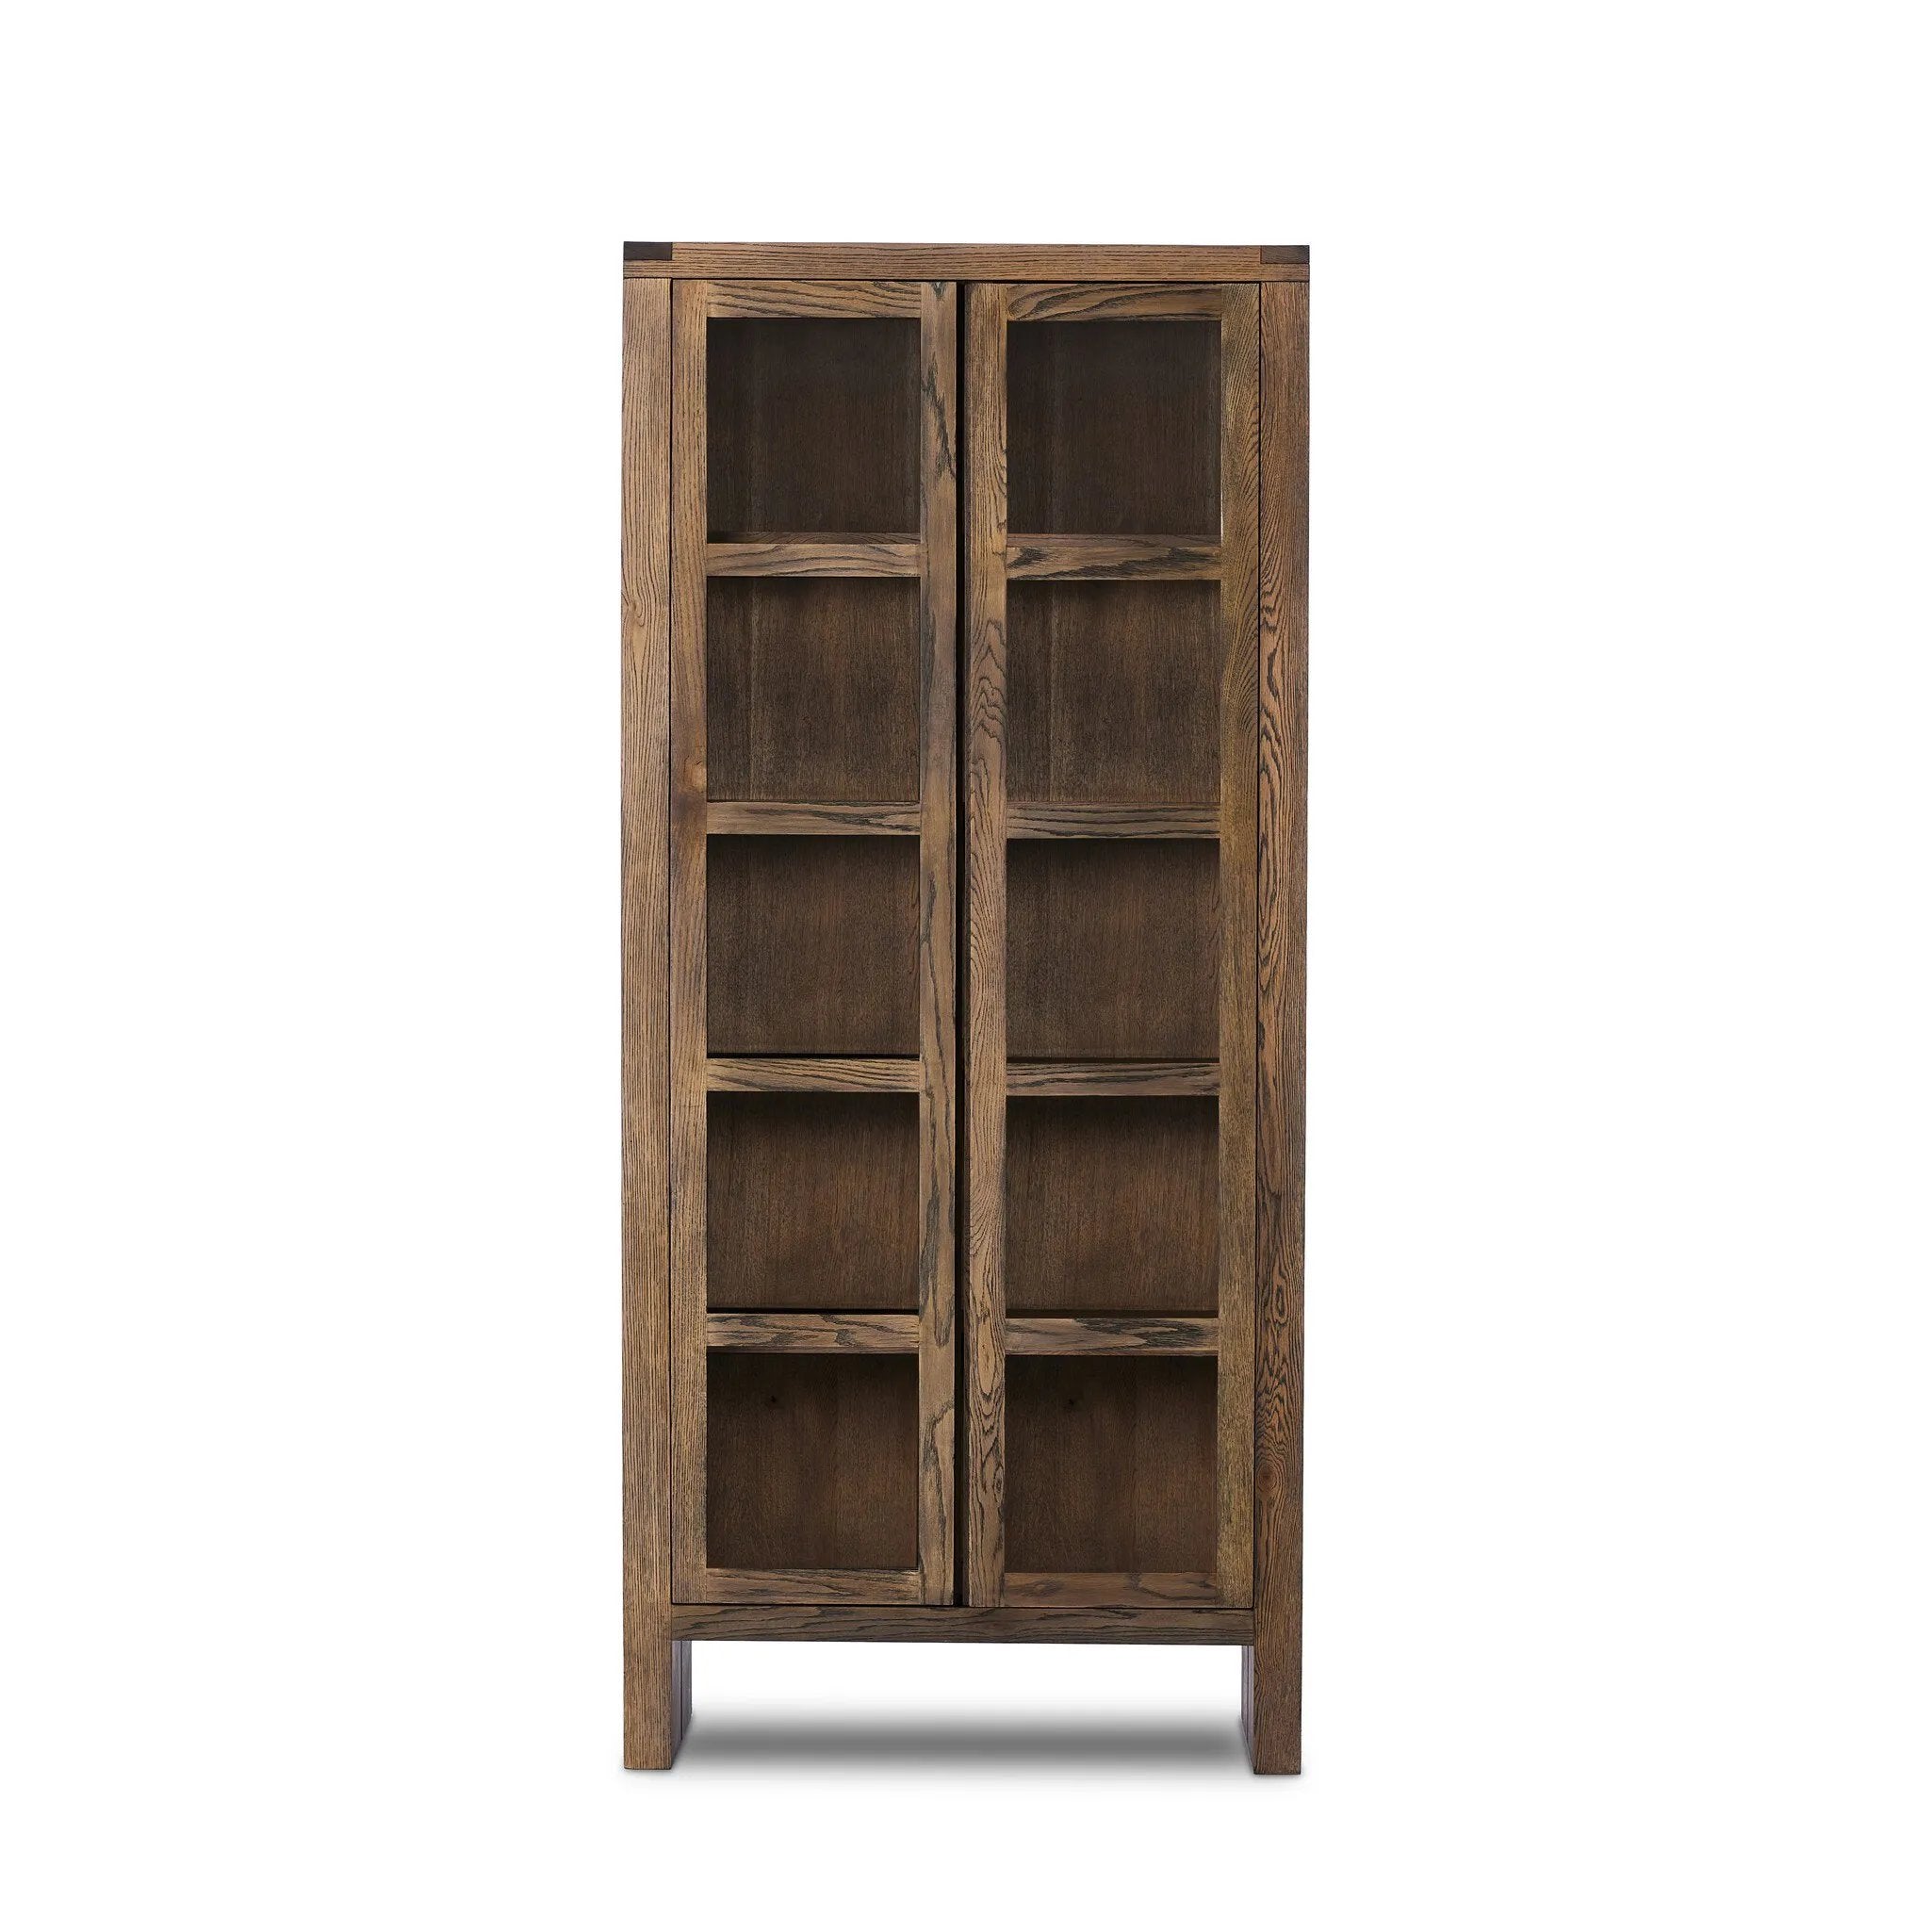 This minimal-inspired bookcase is crafted from a mix of solid oak and worn oak veneer. Featuring glass-front doors and spacious shelves for storage and display.Collection: Bennet Amethyst Home provides interior design, new home construction design consulting, vintage area rugs, and lighting in the Nashville metro area.